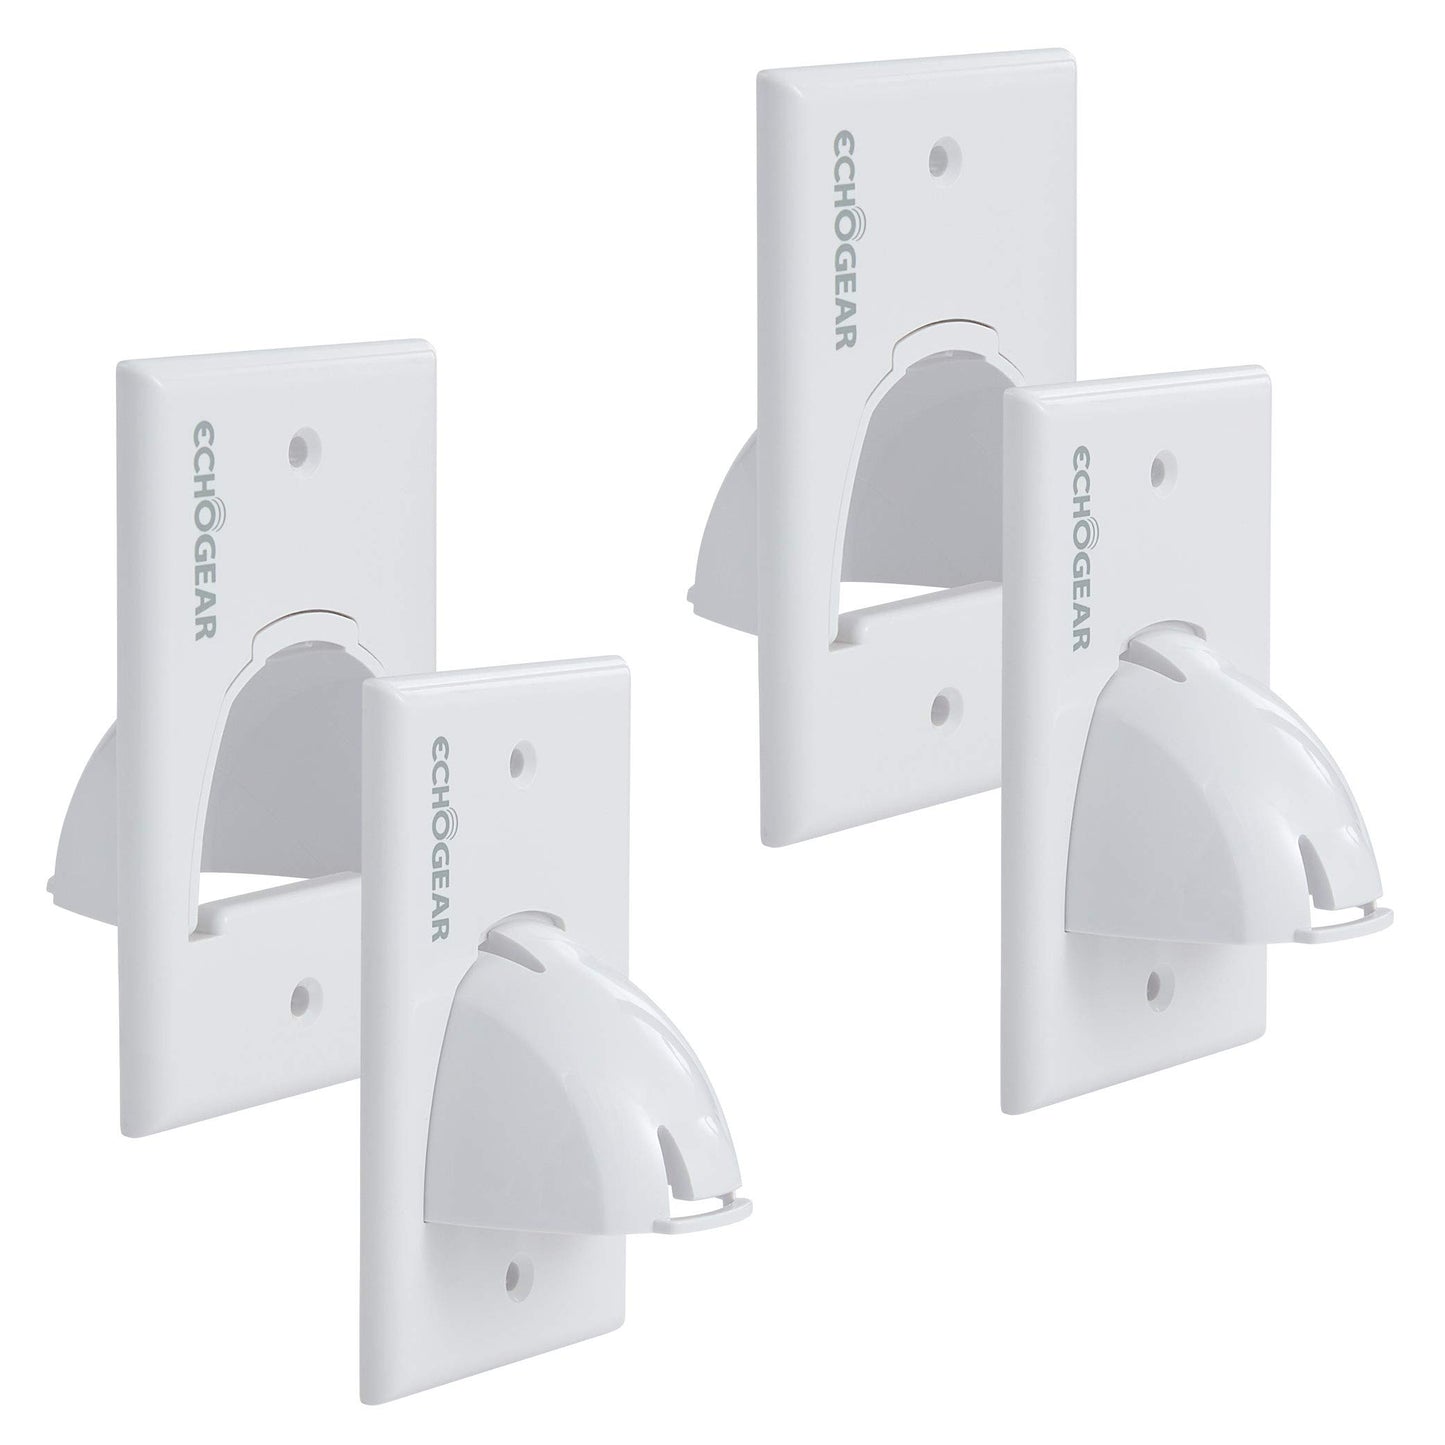 ECHOGEAR White in Wall Cable Hider - 2 Pack Single Gang Pass Through Pair with Drywall Brackets Included - Manage 8 Low Voltage Cords Behind The Wall - Quick Install with Wall Template